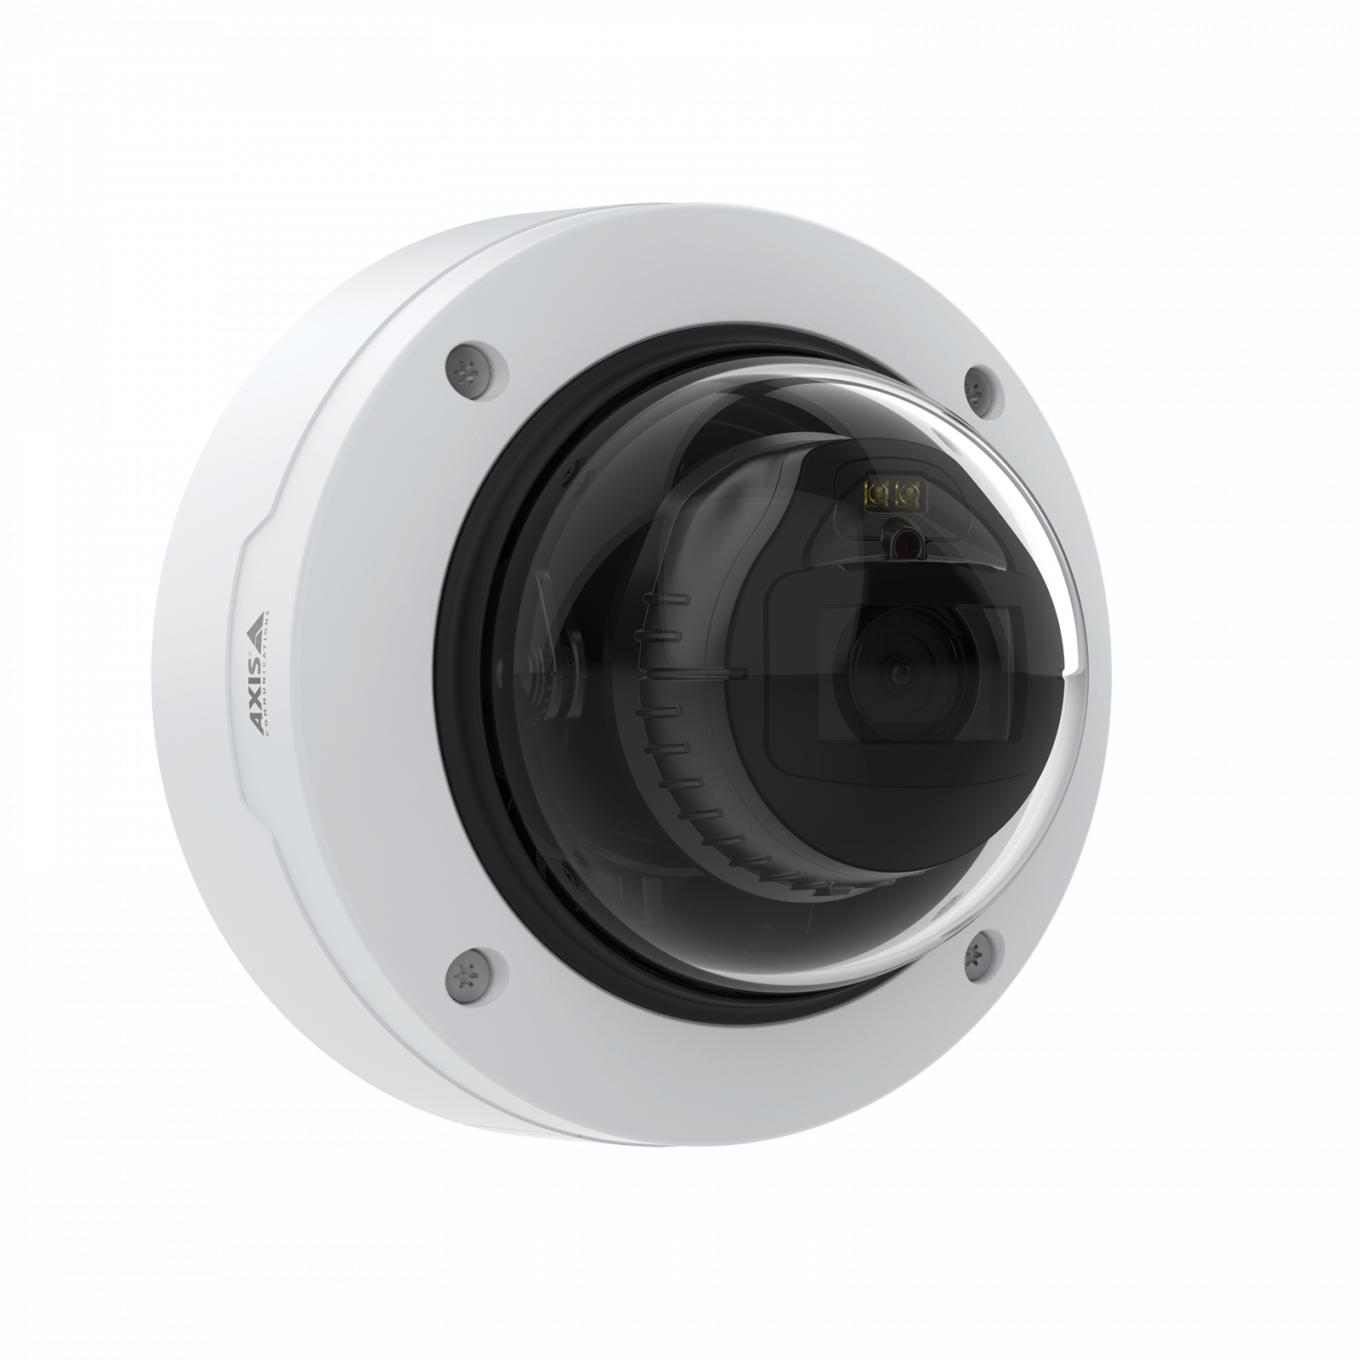 AXIS P3268-LV Dome Camera on wall from right